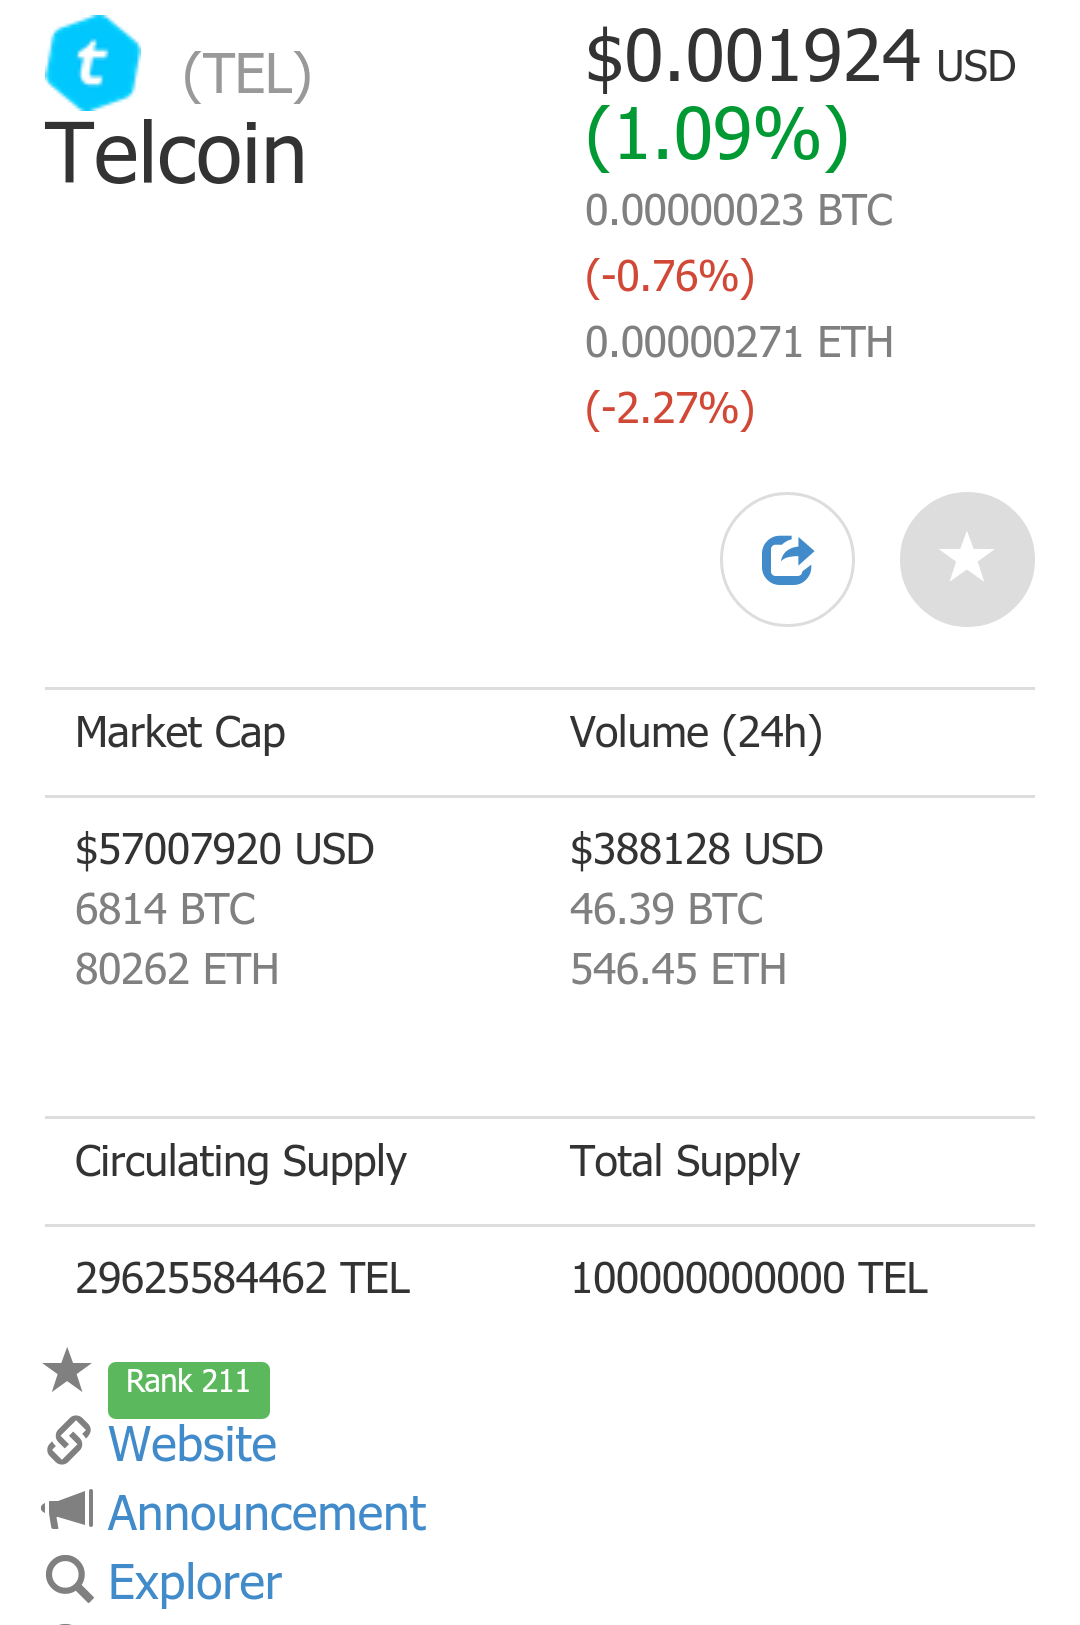 How To Save Money with telcoin app?